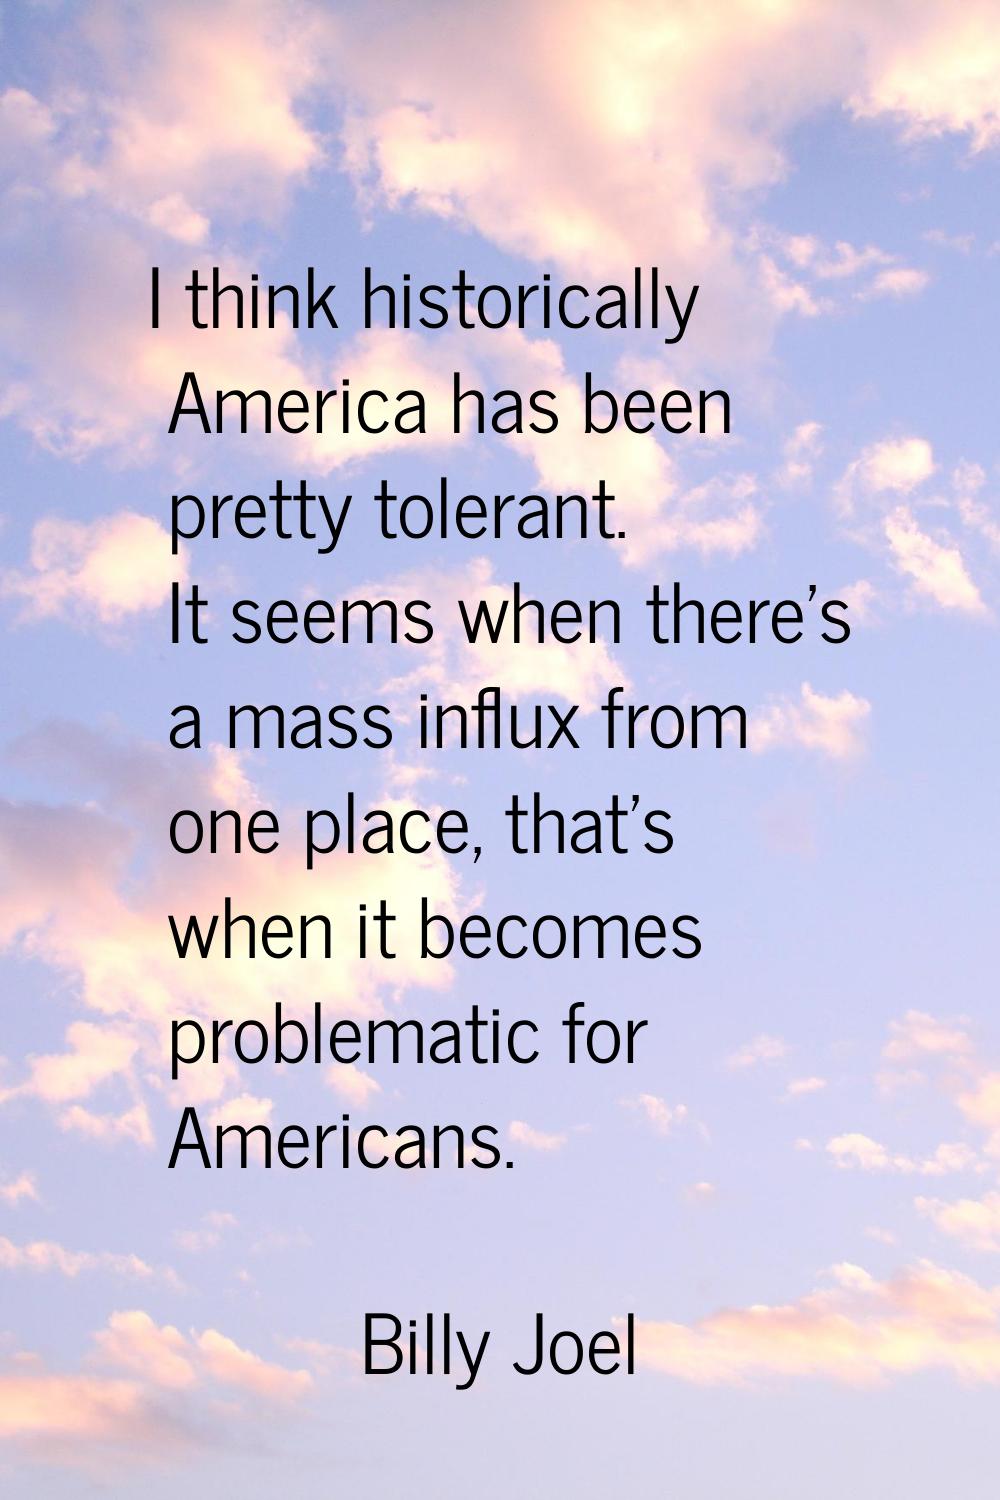 I think historically America has been pretty tolerant. It seems when there's a mass influx from one